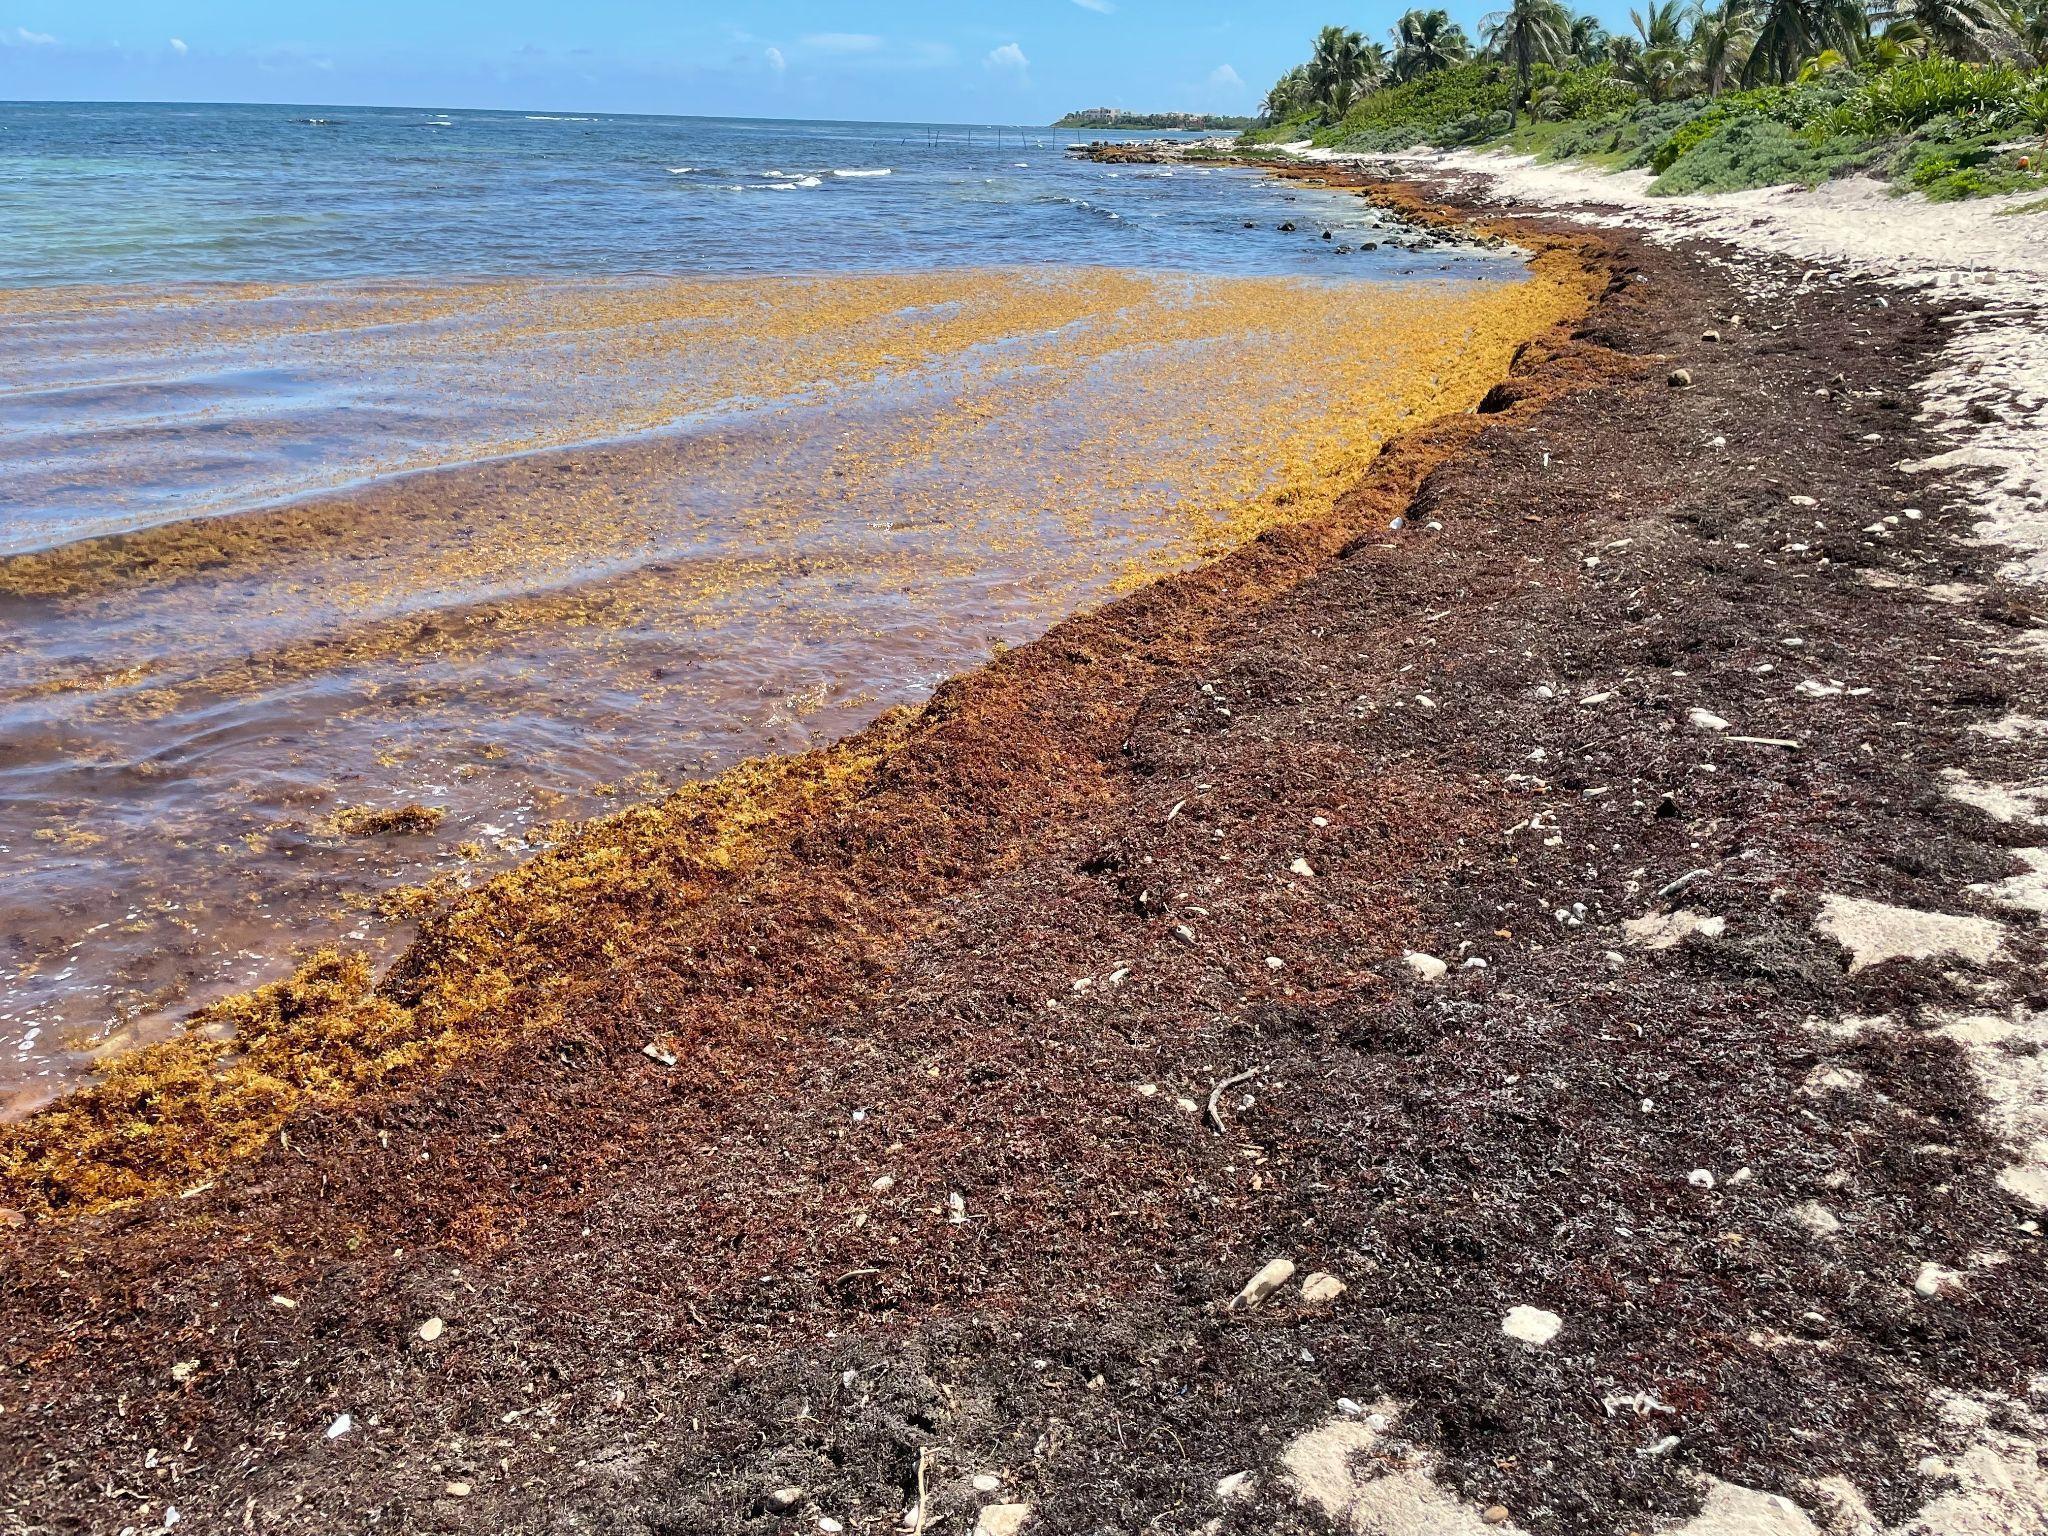 Sargassum accumulates on beaches and in shallow waters